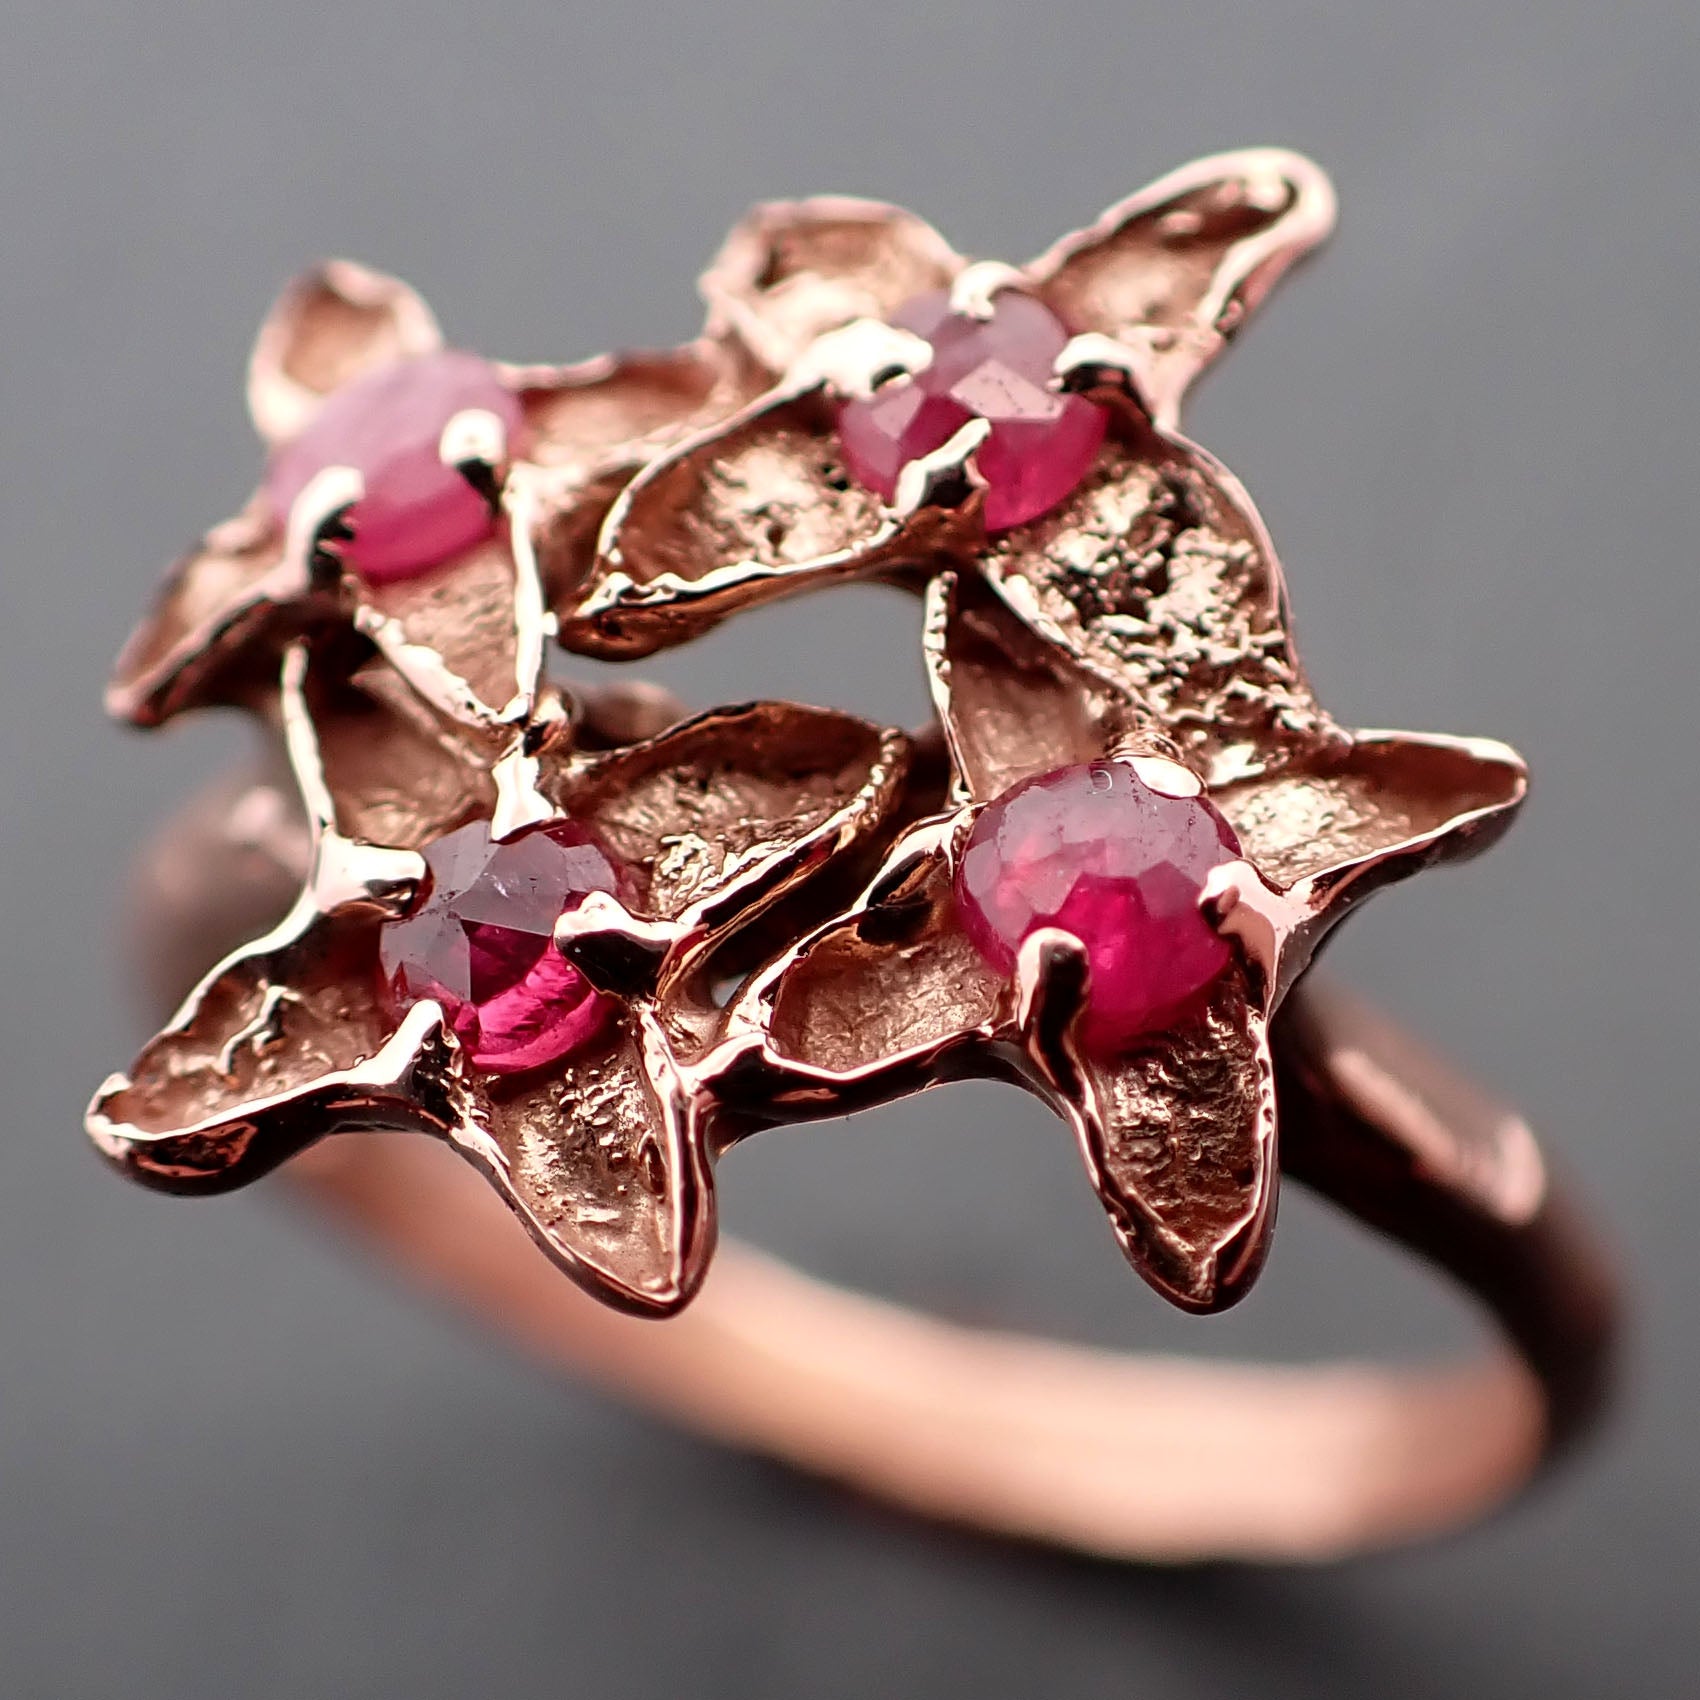 Real Lilac Flower casting with faceted Rubies 14k Rose gold multi stone Enchanted Garden Floral Ring byAngeline 3371